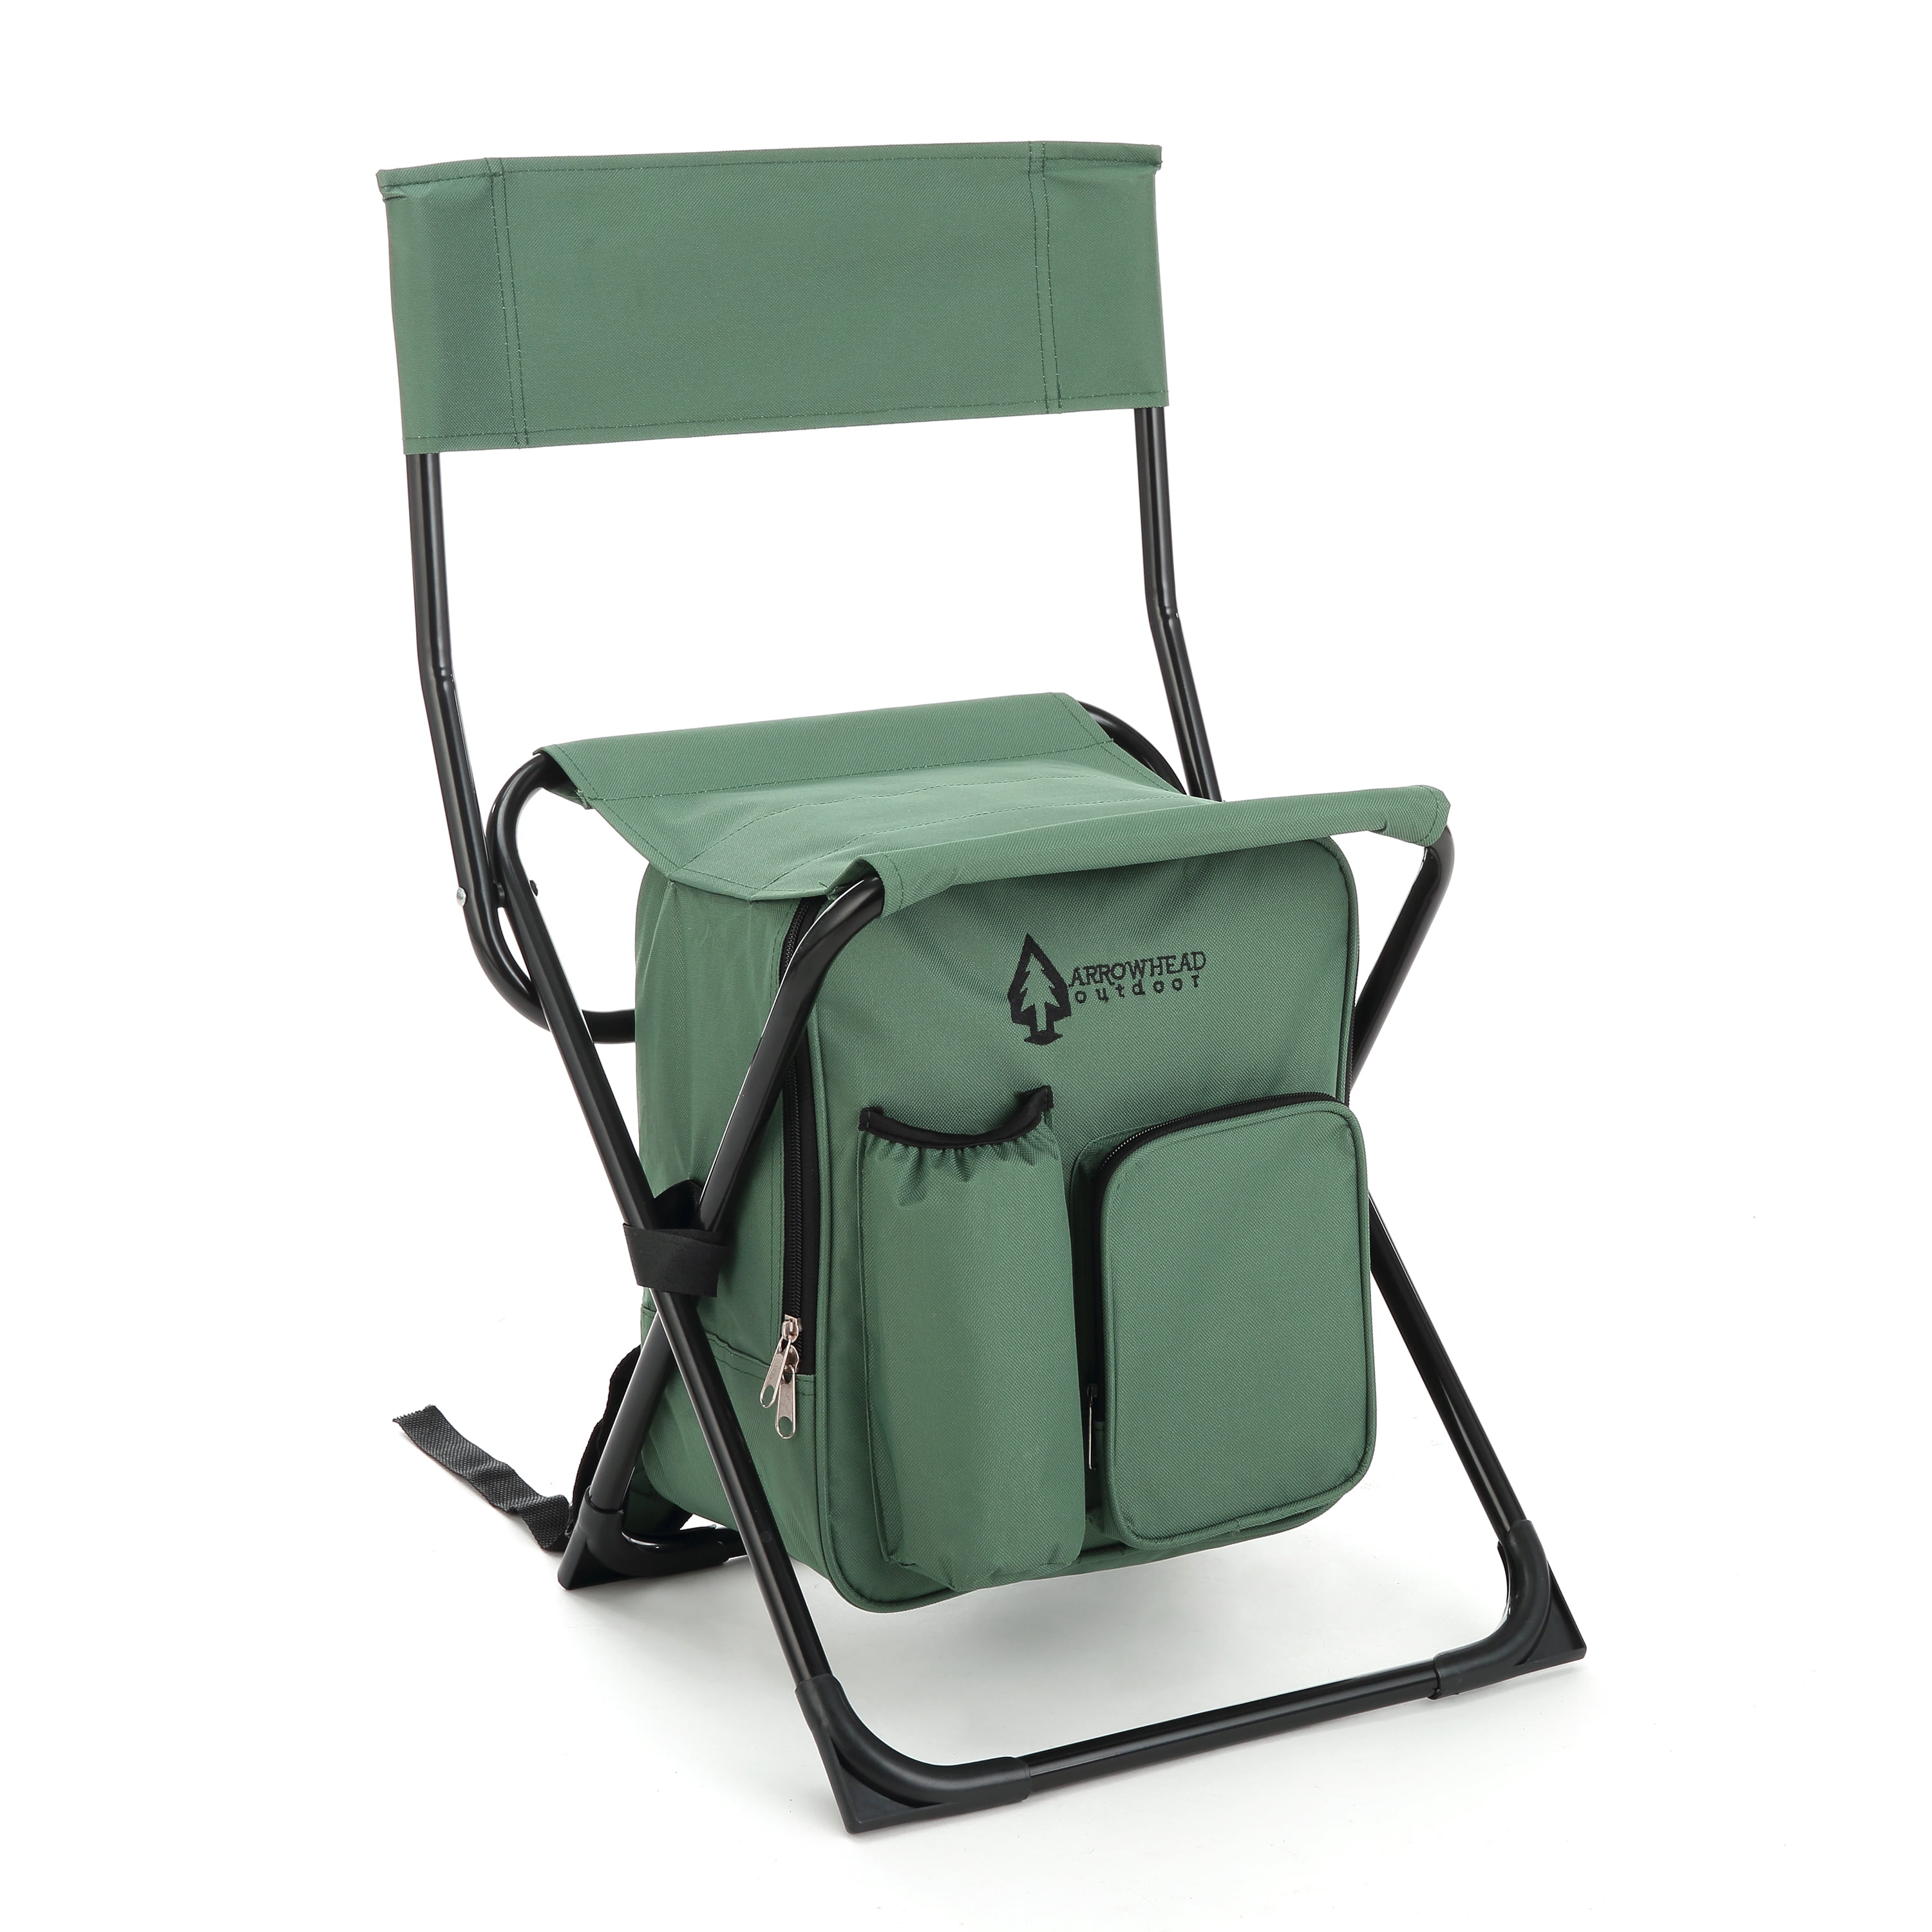 ARROWHEAD OUTDOOR Multi-Function 3-in-1 Compact Camp Chair: Backpack, Stool  & Insulated Cooler, w/ Bottle Holder & Storage Bag, External Pockets,  Backrest, Fishing, Hiking, Heavy-Duty, USA-Based 